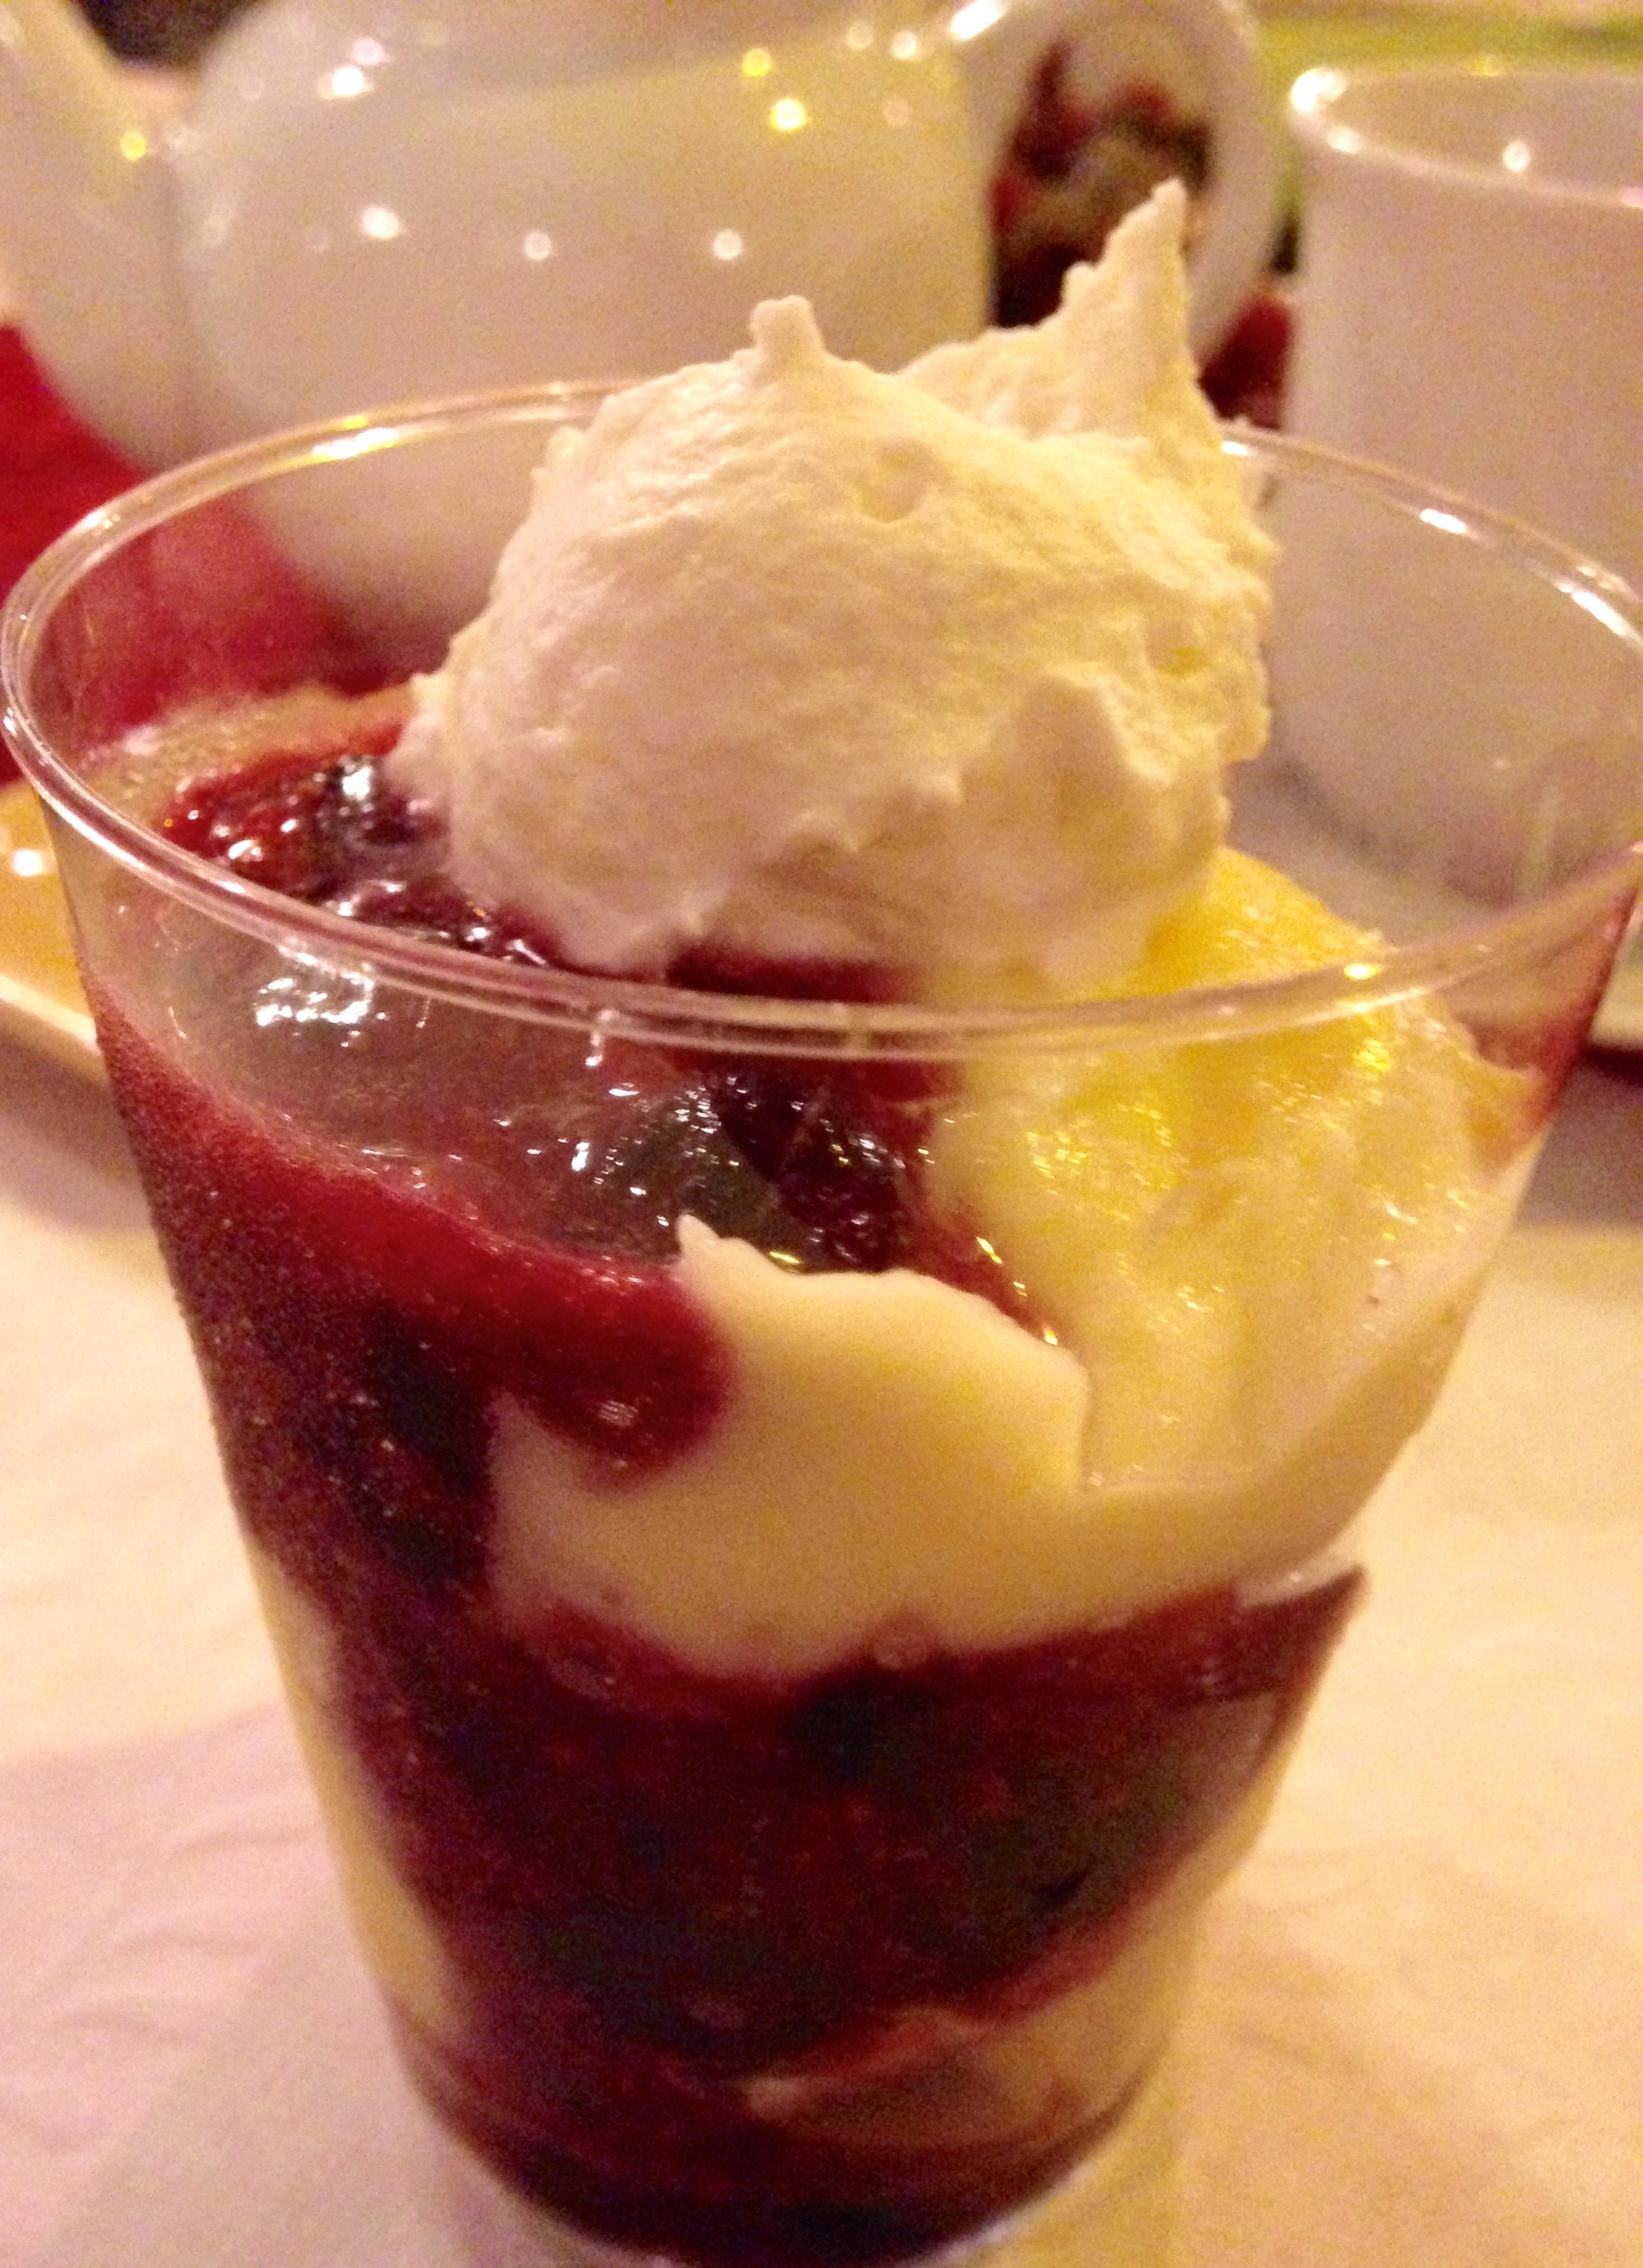 English Trifle from Cuthbert's Tea shoppe